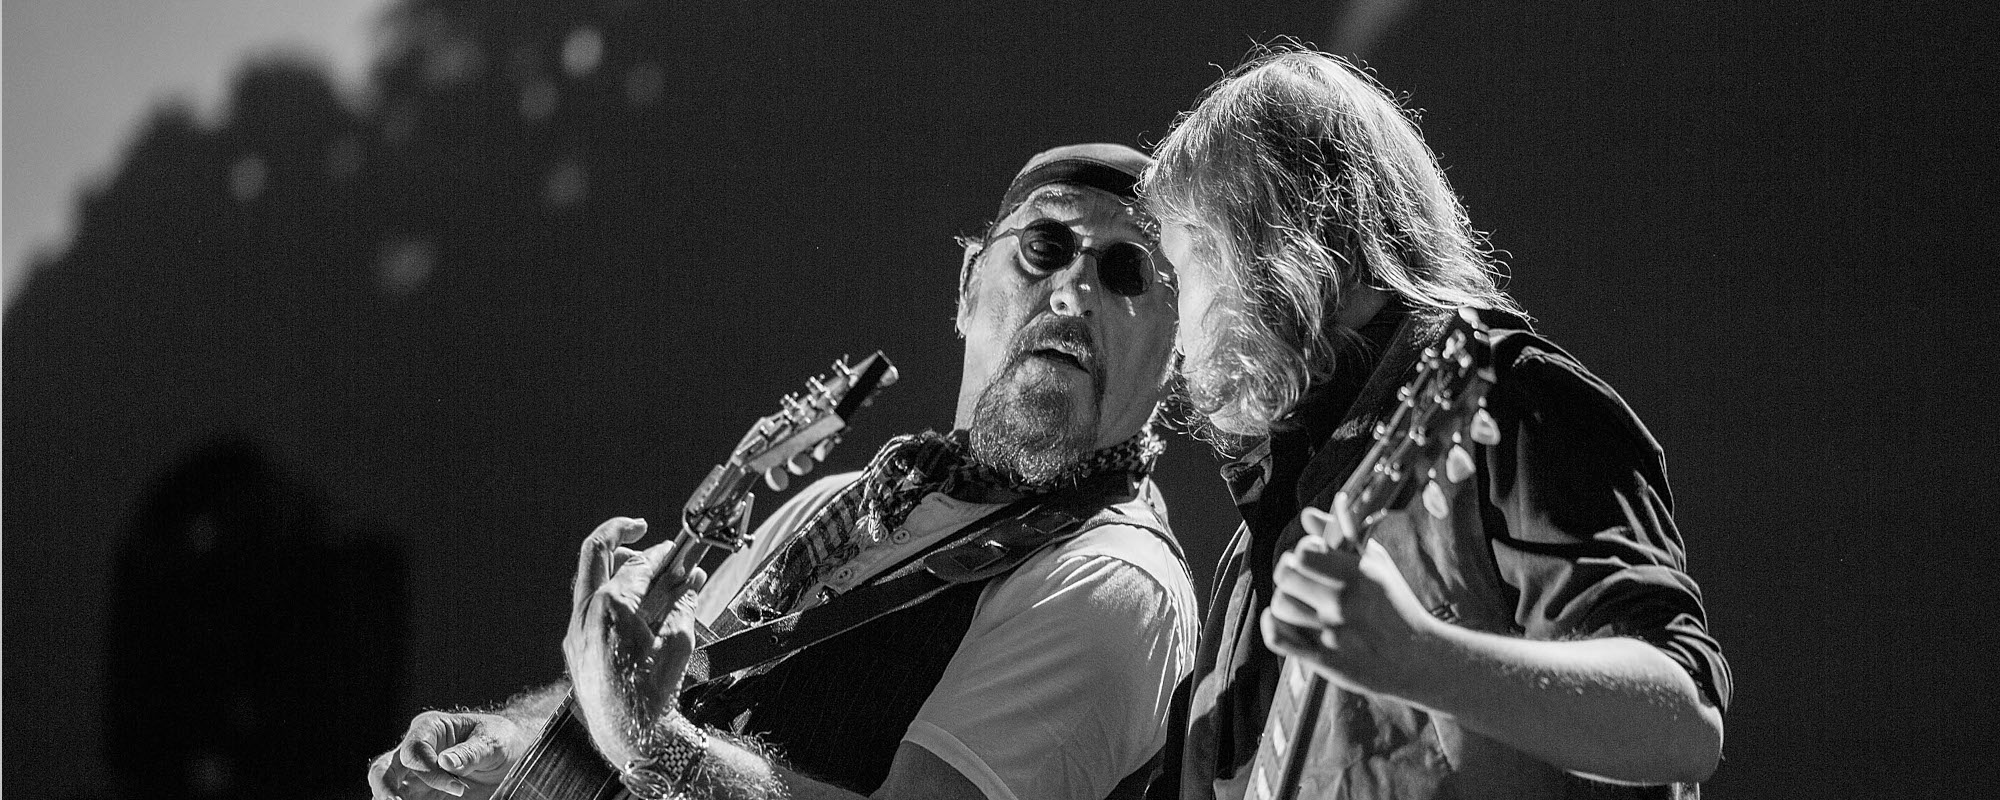 Review: Jethro Tull Turns Another Page